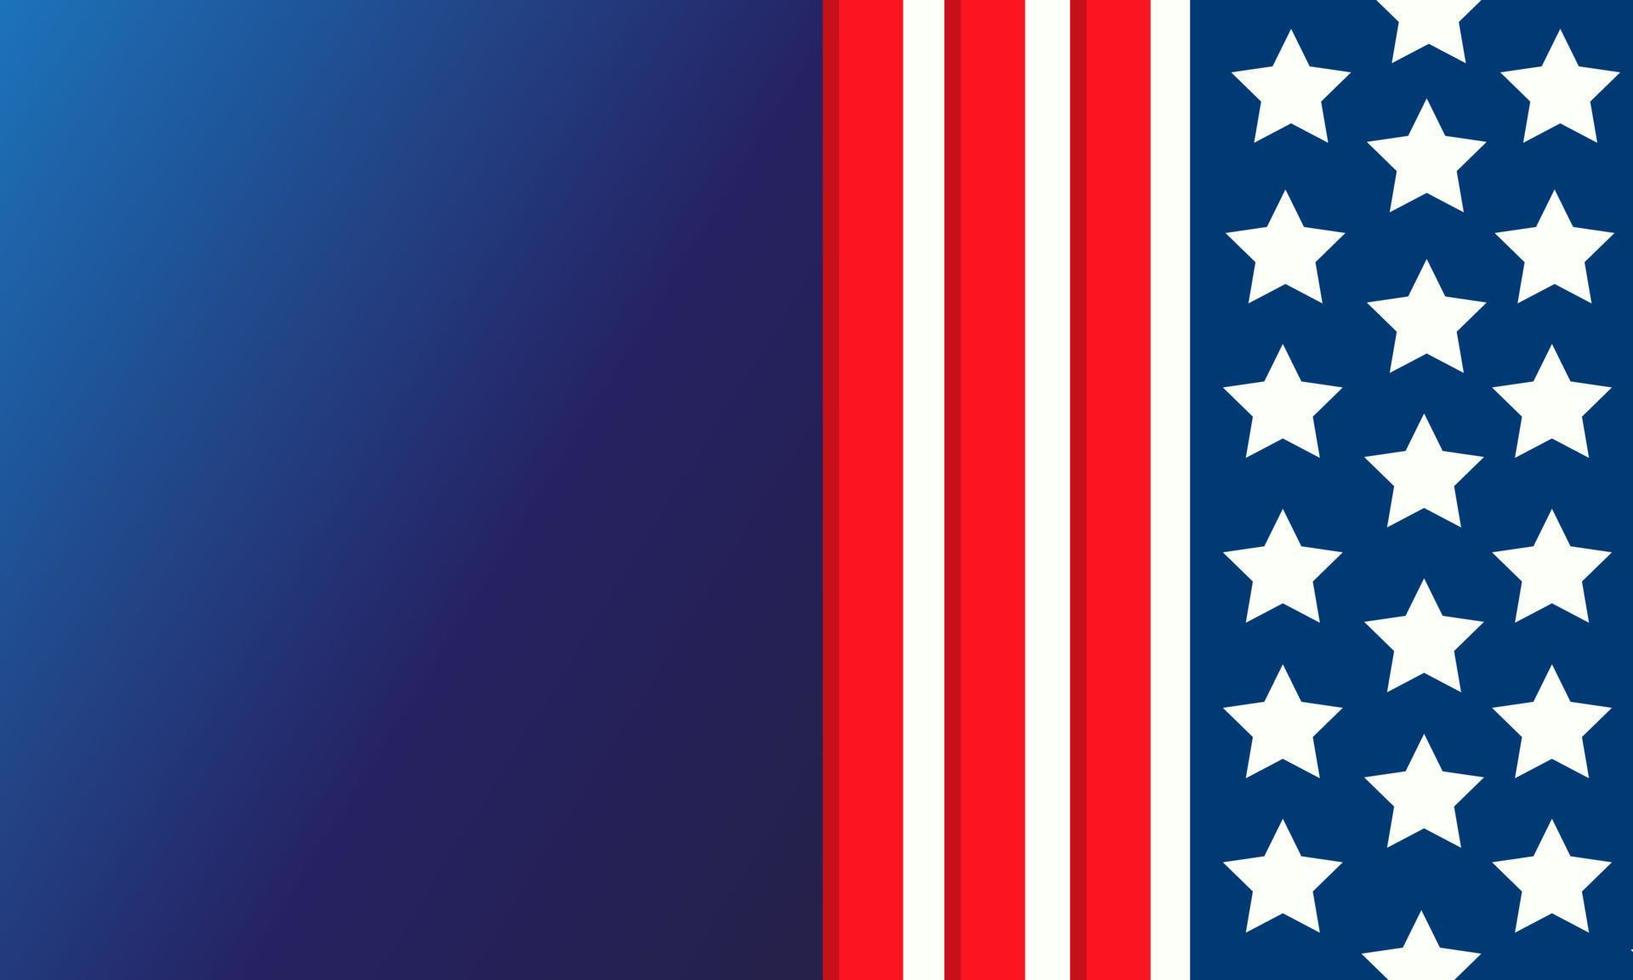 american USA flag style, stars and stripes, united states of america on blue background vector